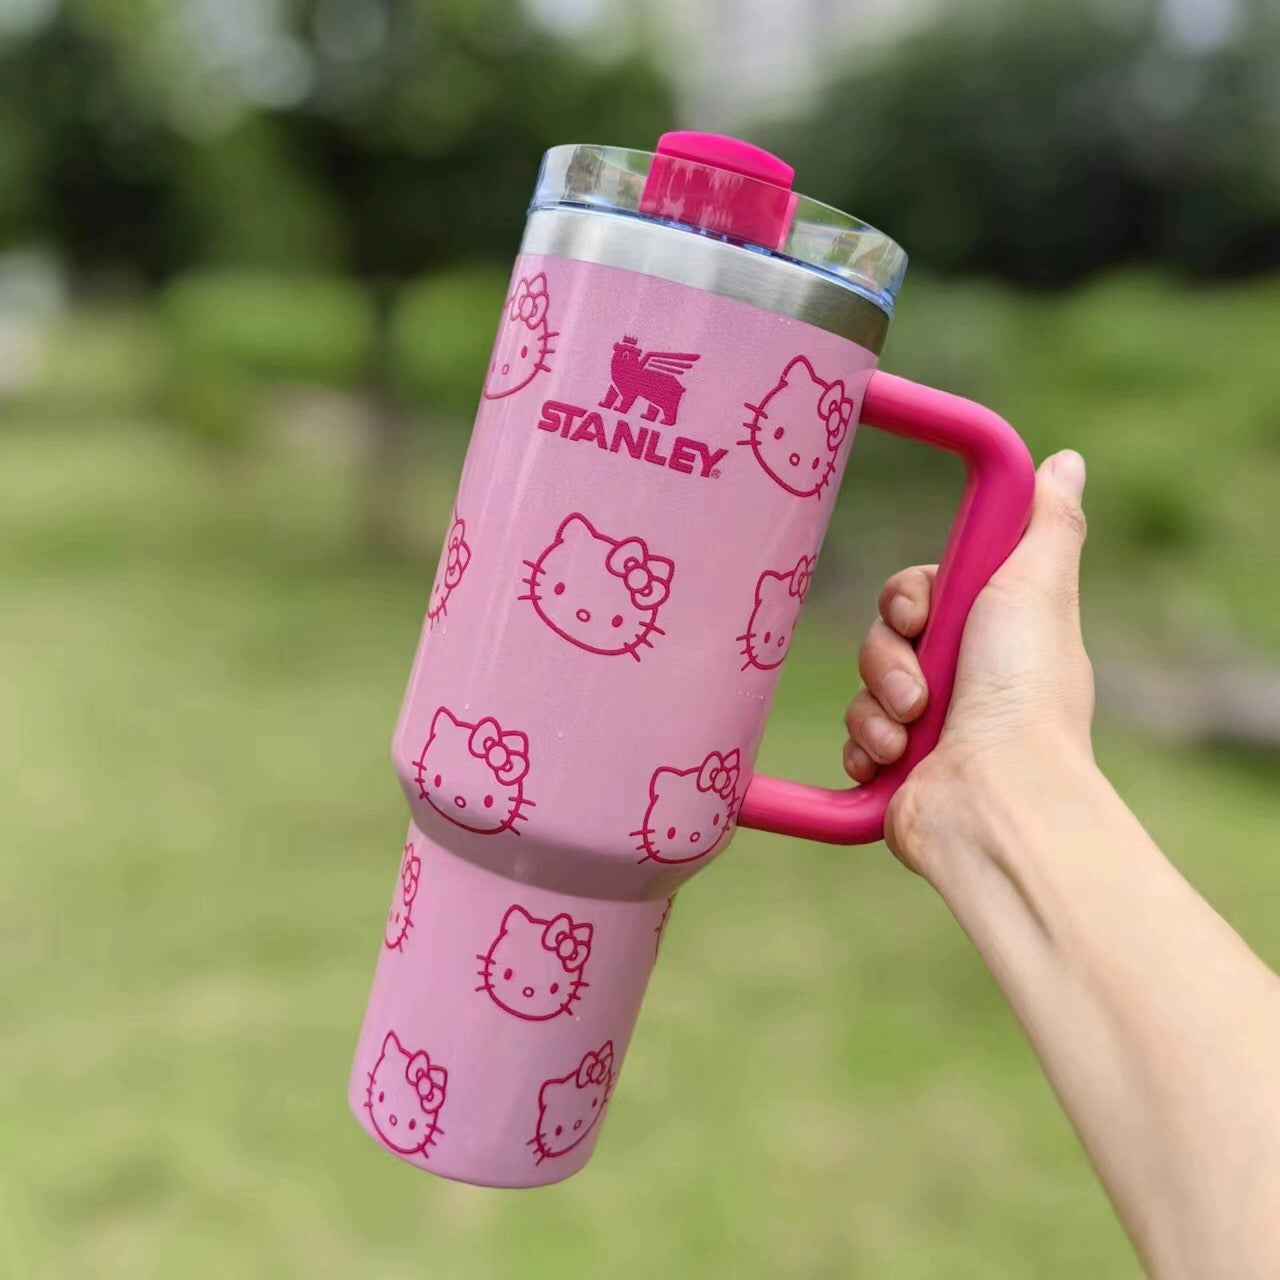 HelloKitty In-Car Insulated Cup 1200 ml Tumbler with Handle , Stainless Steel Insulated Cup with Lid Gym Water Bottle Cupholder Friendly Women Travel Mug